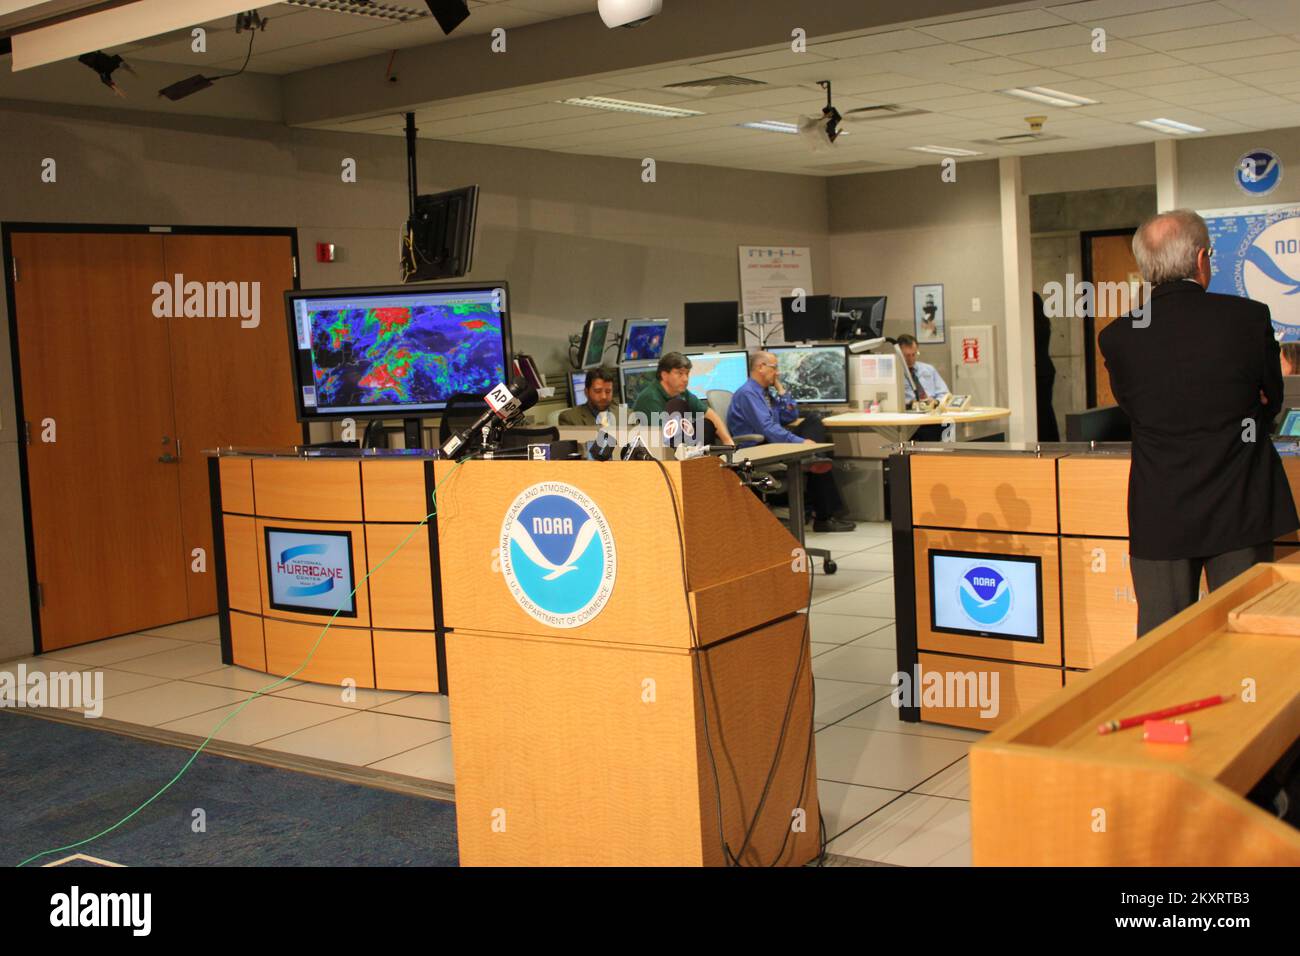 Orlando, Fla. , June 1, 2012   Photo of the speakers podium at a press conference during the National Hurricane Conference.. Photographs Relating to Disasters and Emergency Management Programs, Activities, and Officials Stock Photo